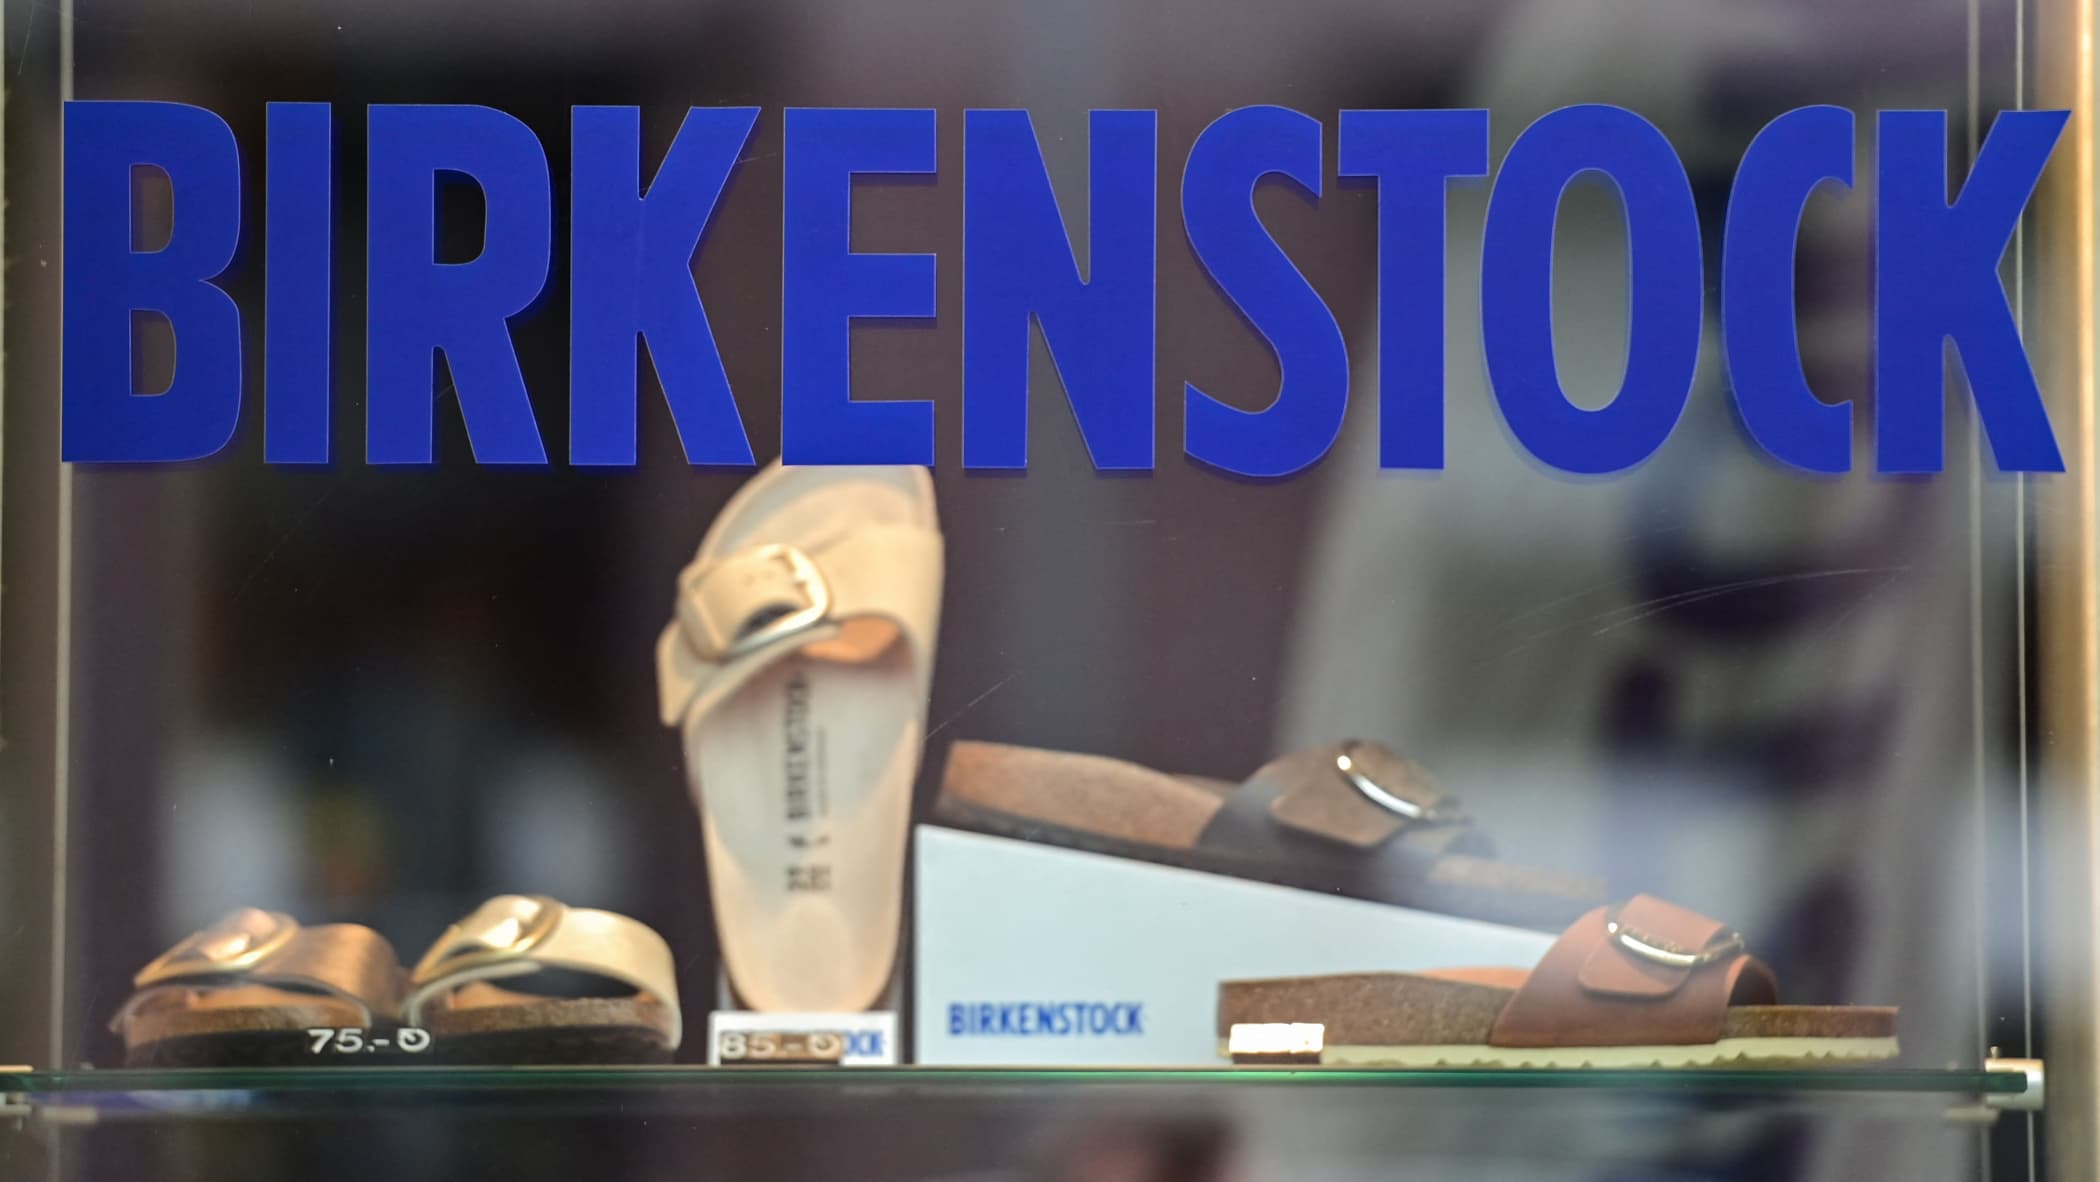 l catterton ipo: Catterton mulls IPO for Birkenstock at more than